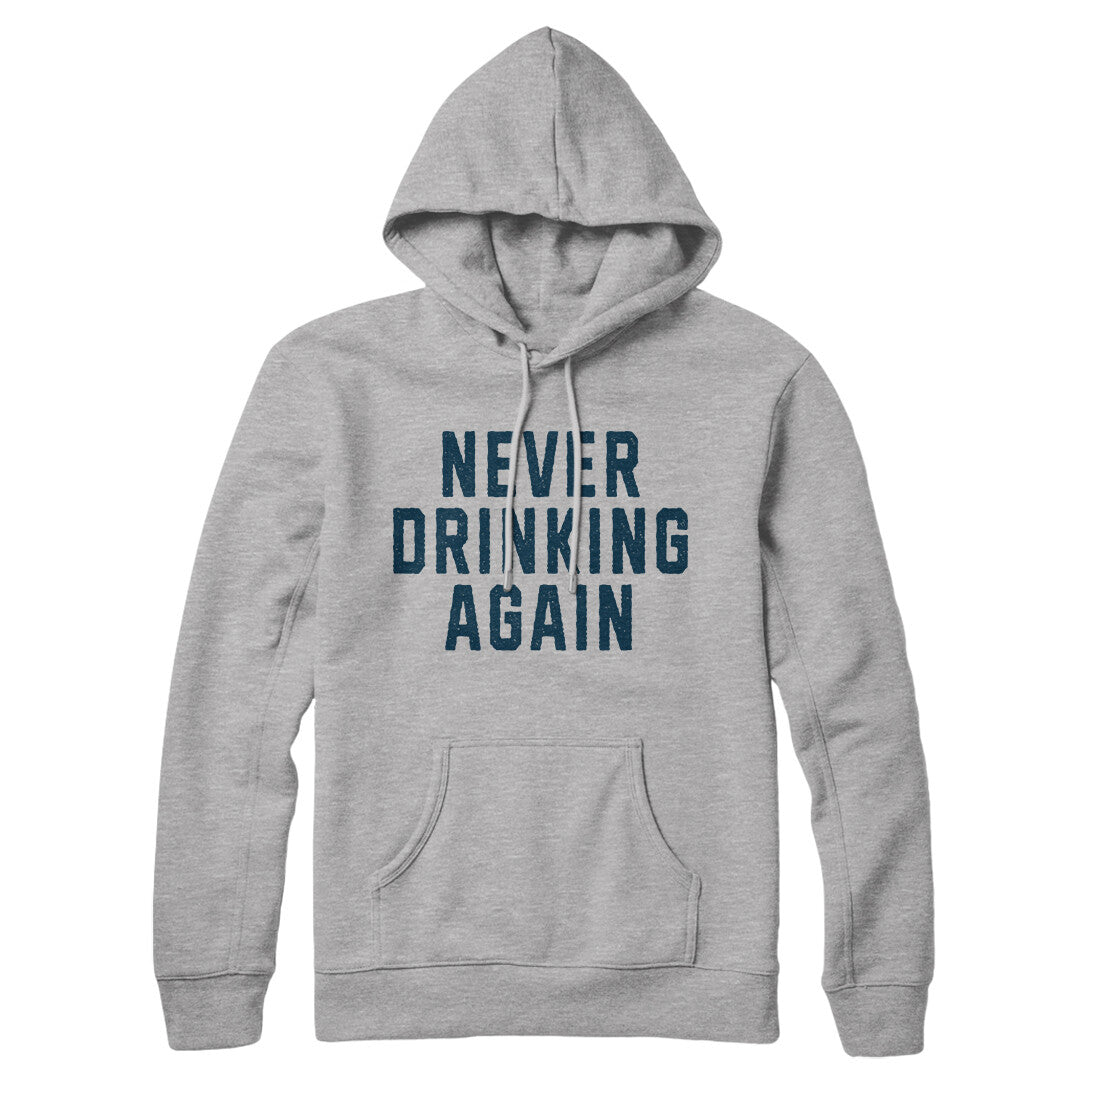 Never Drinking Again in Heather Grey Color